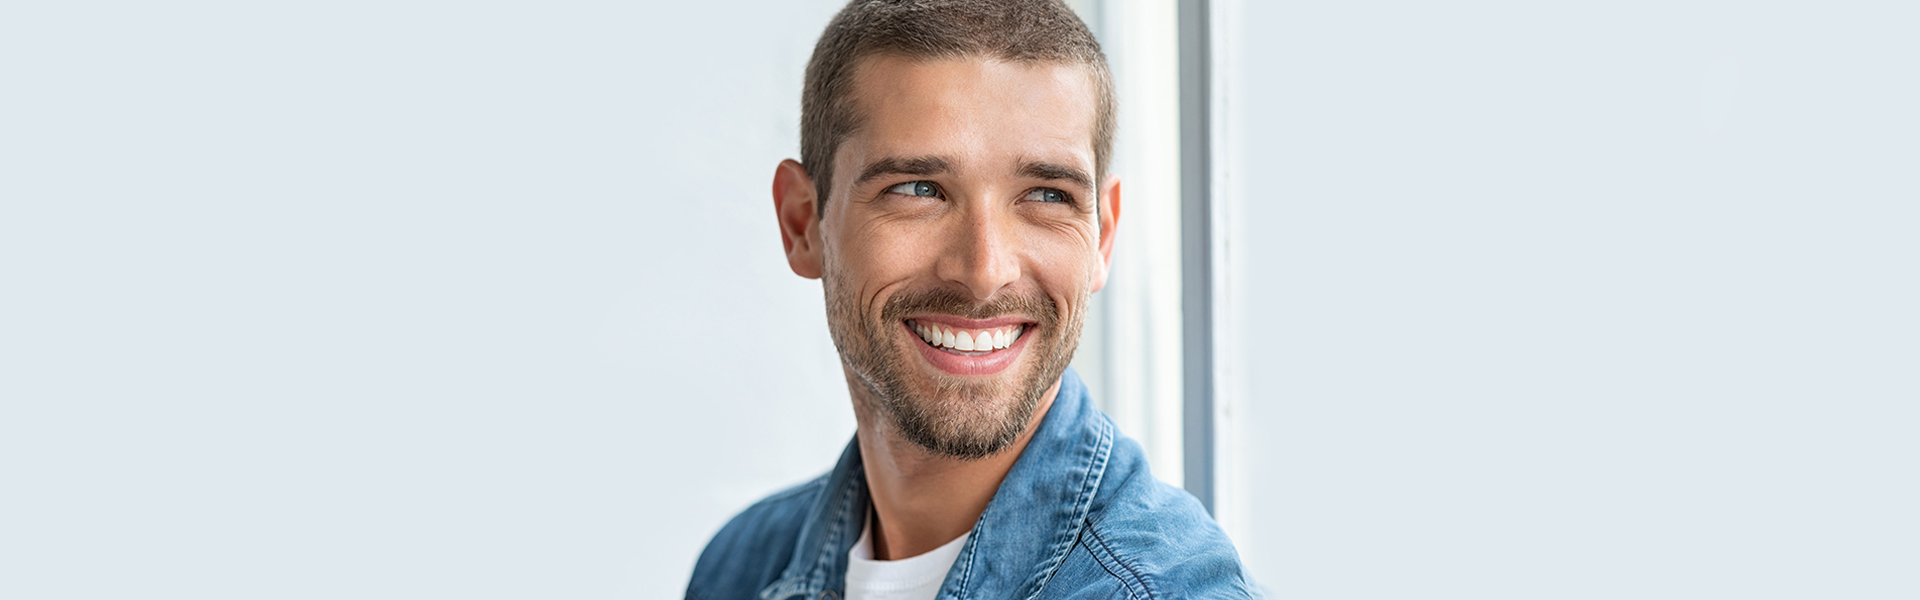 LED Whitening Kits Vs. Professional Whitening Treatment – What Is The Most Effective Whitening Method?